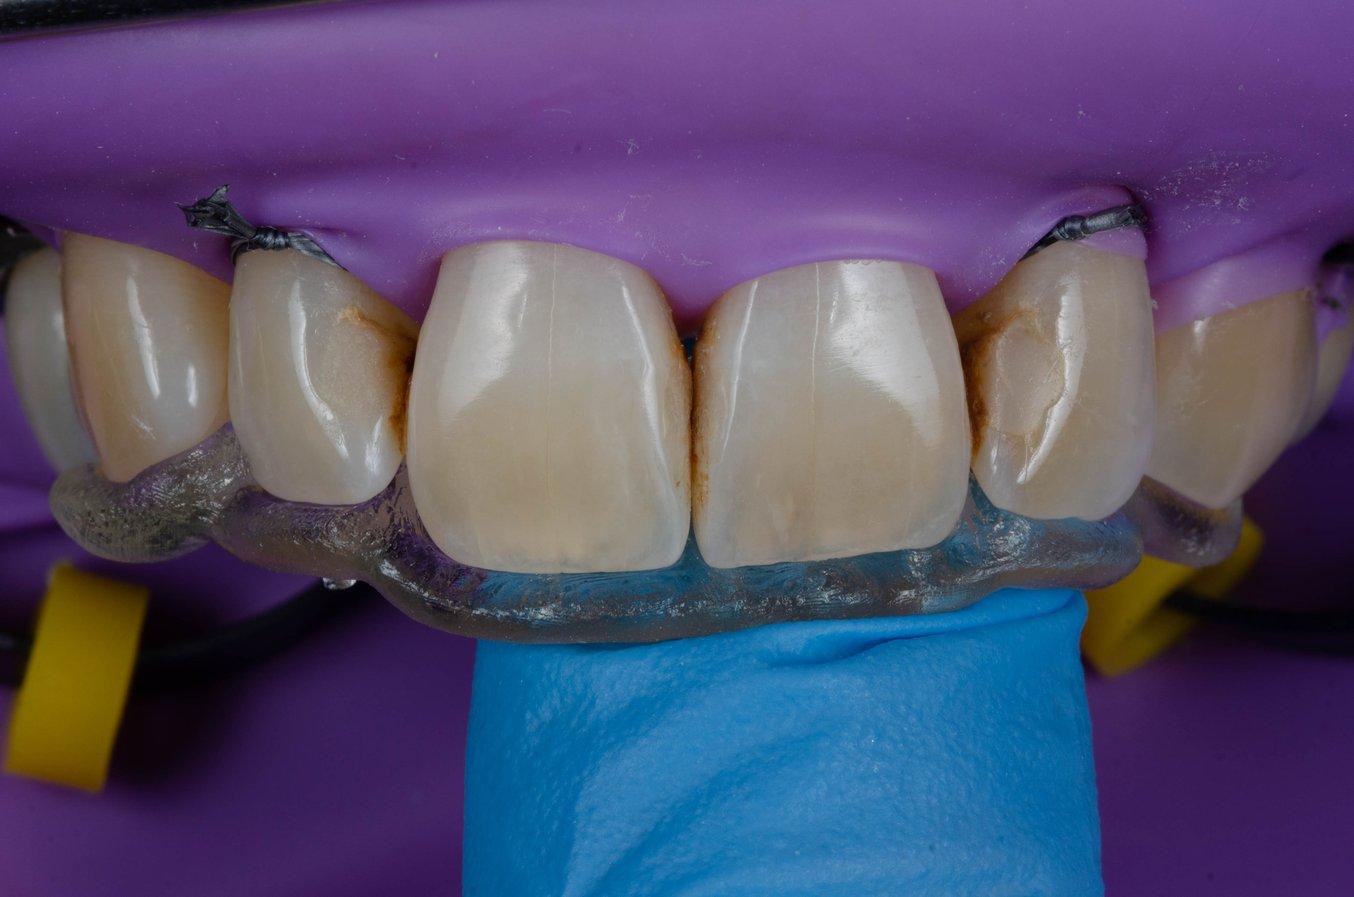 Fit check of a palatal index on front teeth in an upper jaw